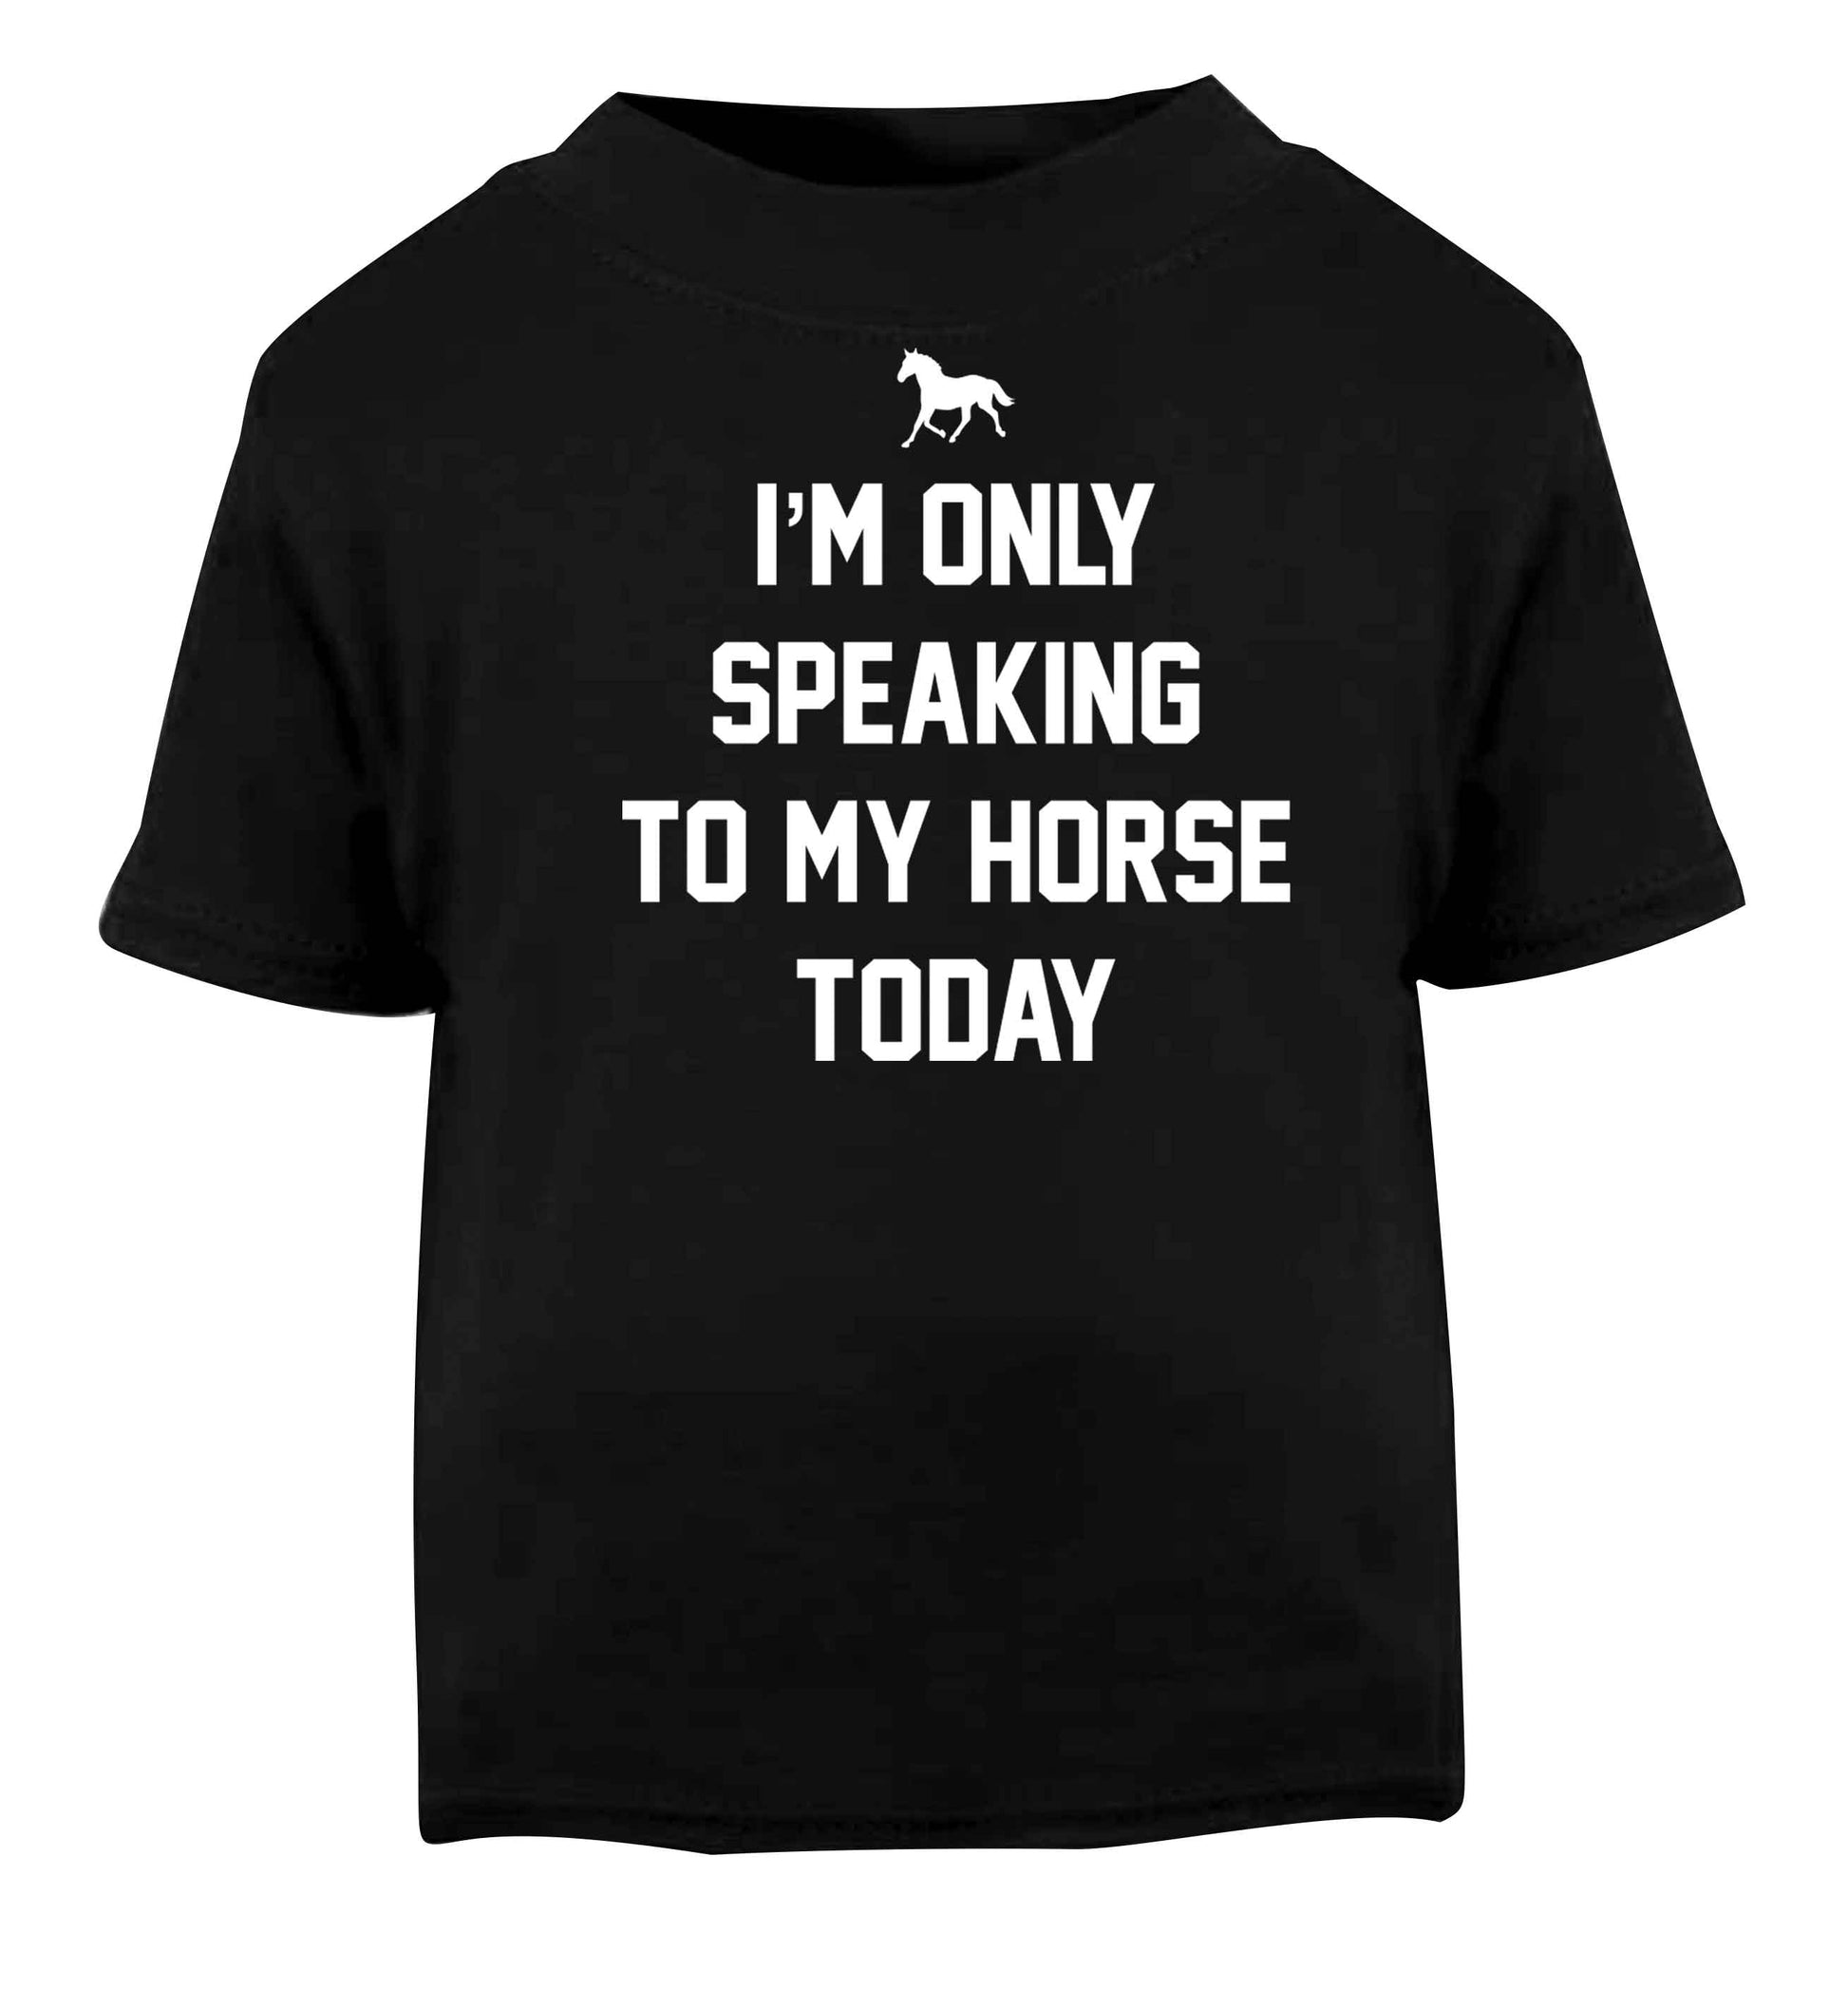 I'm only speaking to my horse today Black baby toddler Tshirt 2 years